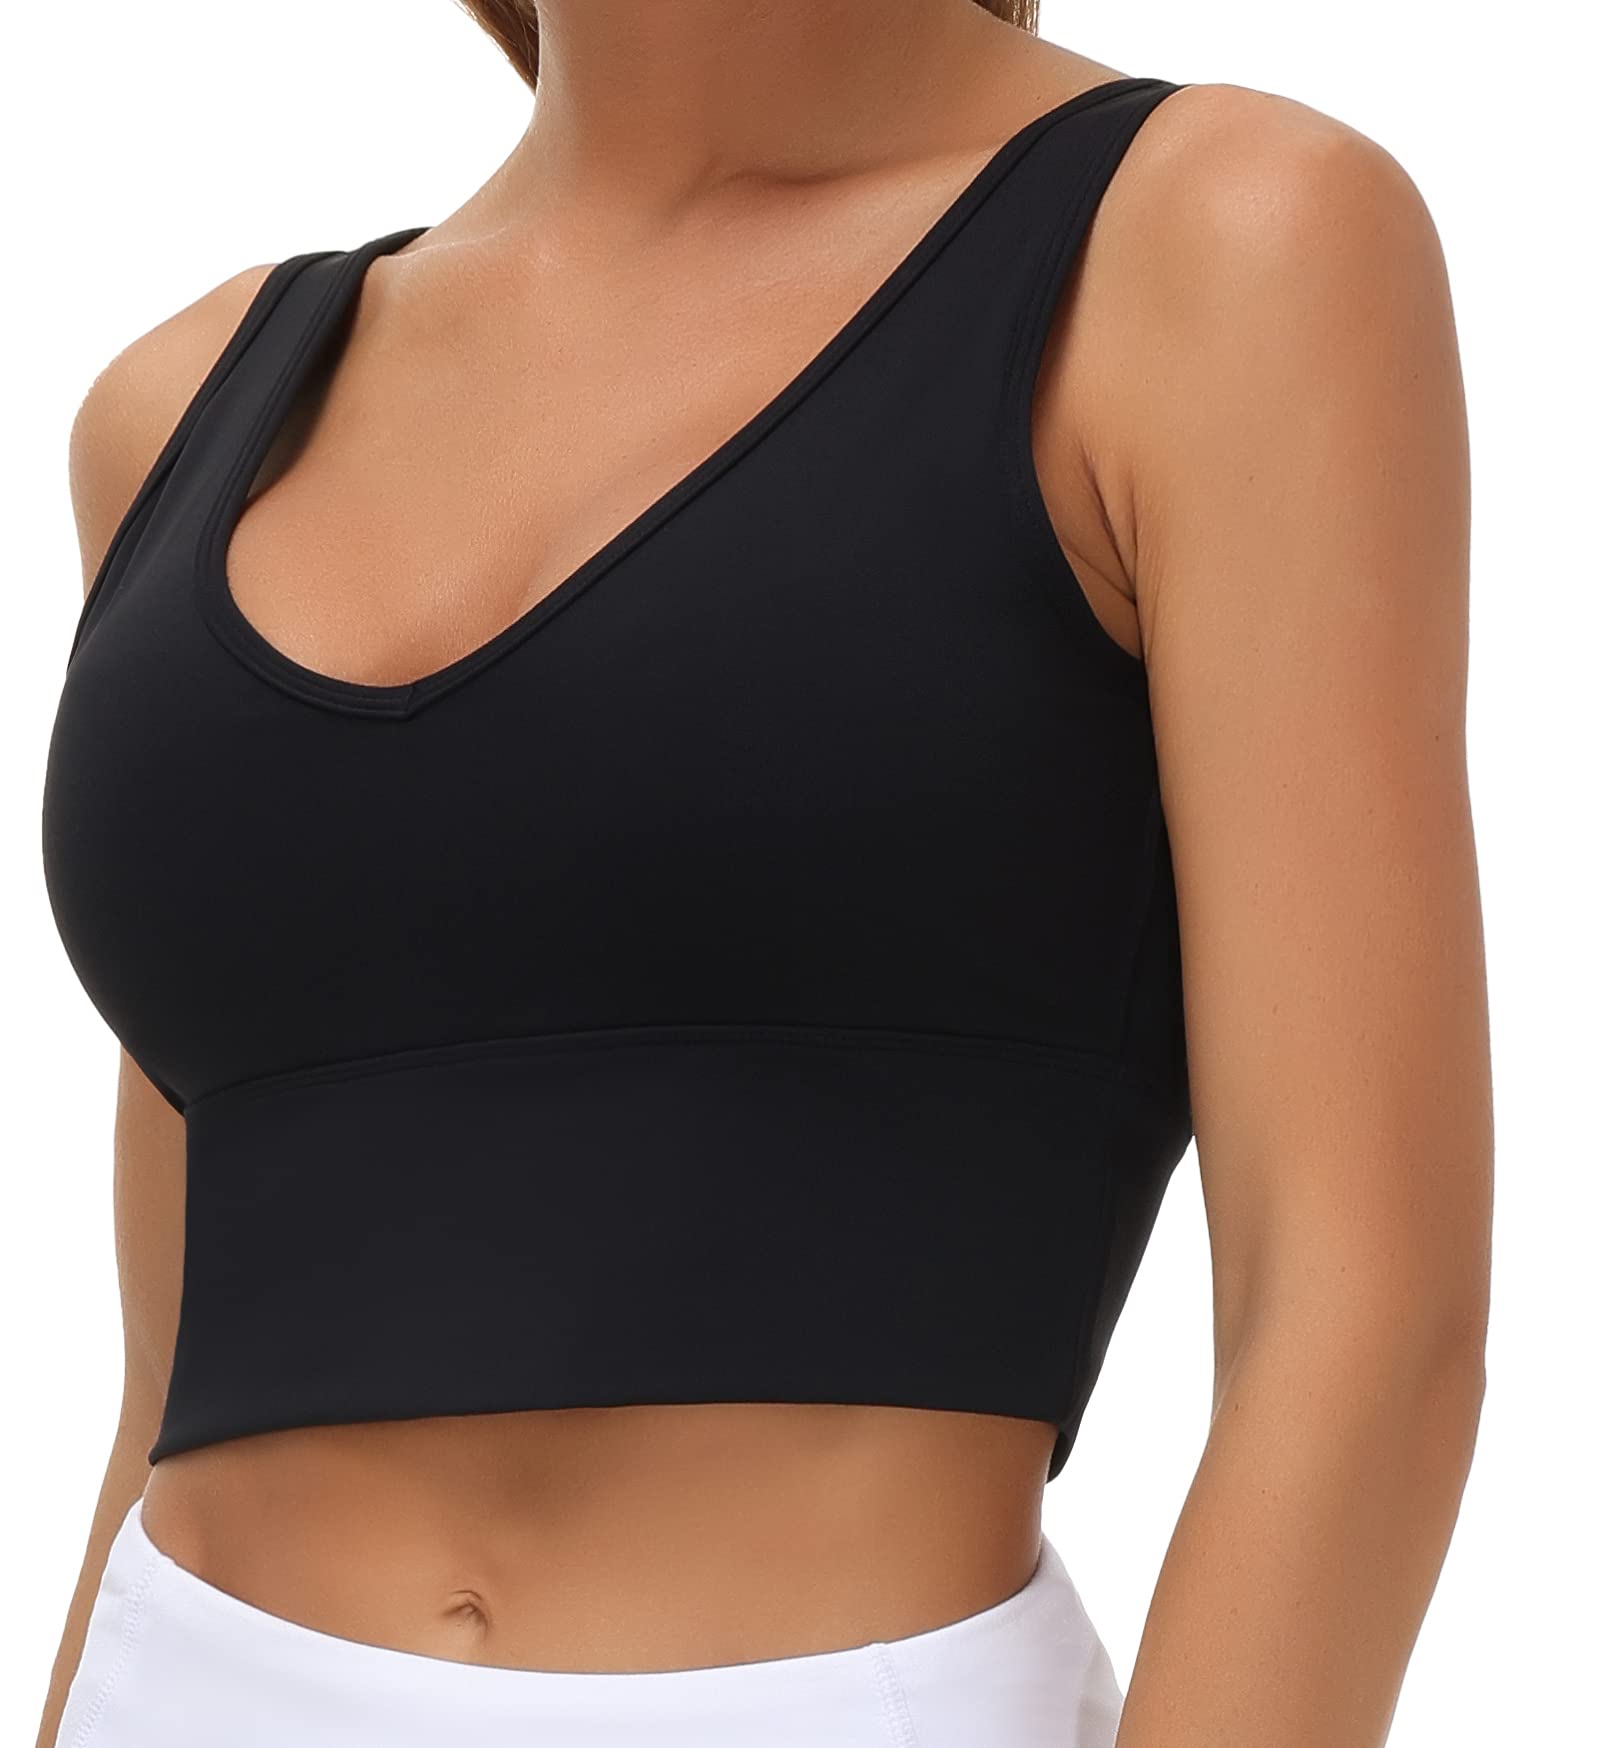 THE GYM PEOPLE Womens Longline Sports Bra Padded Crop Tank Tops Workout Yoga Bra with Removable Pads